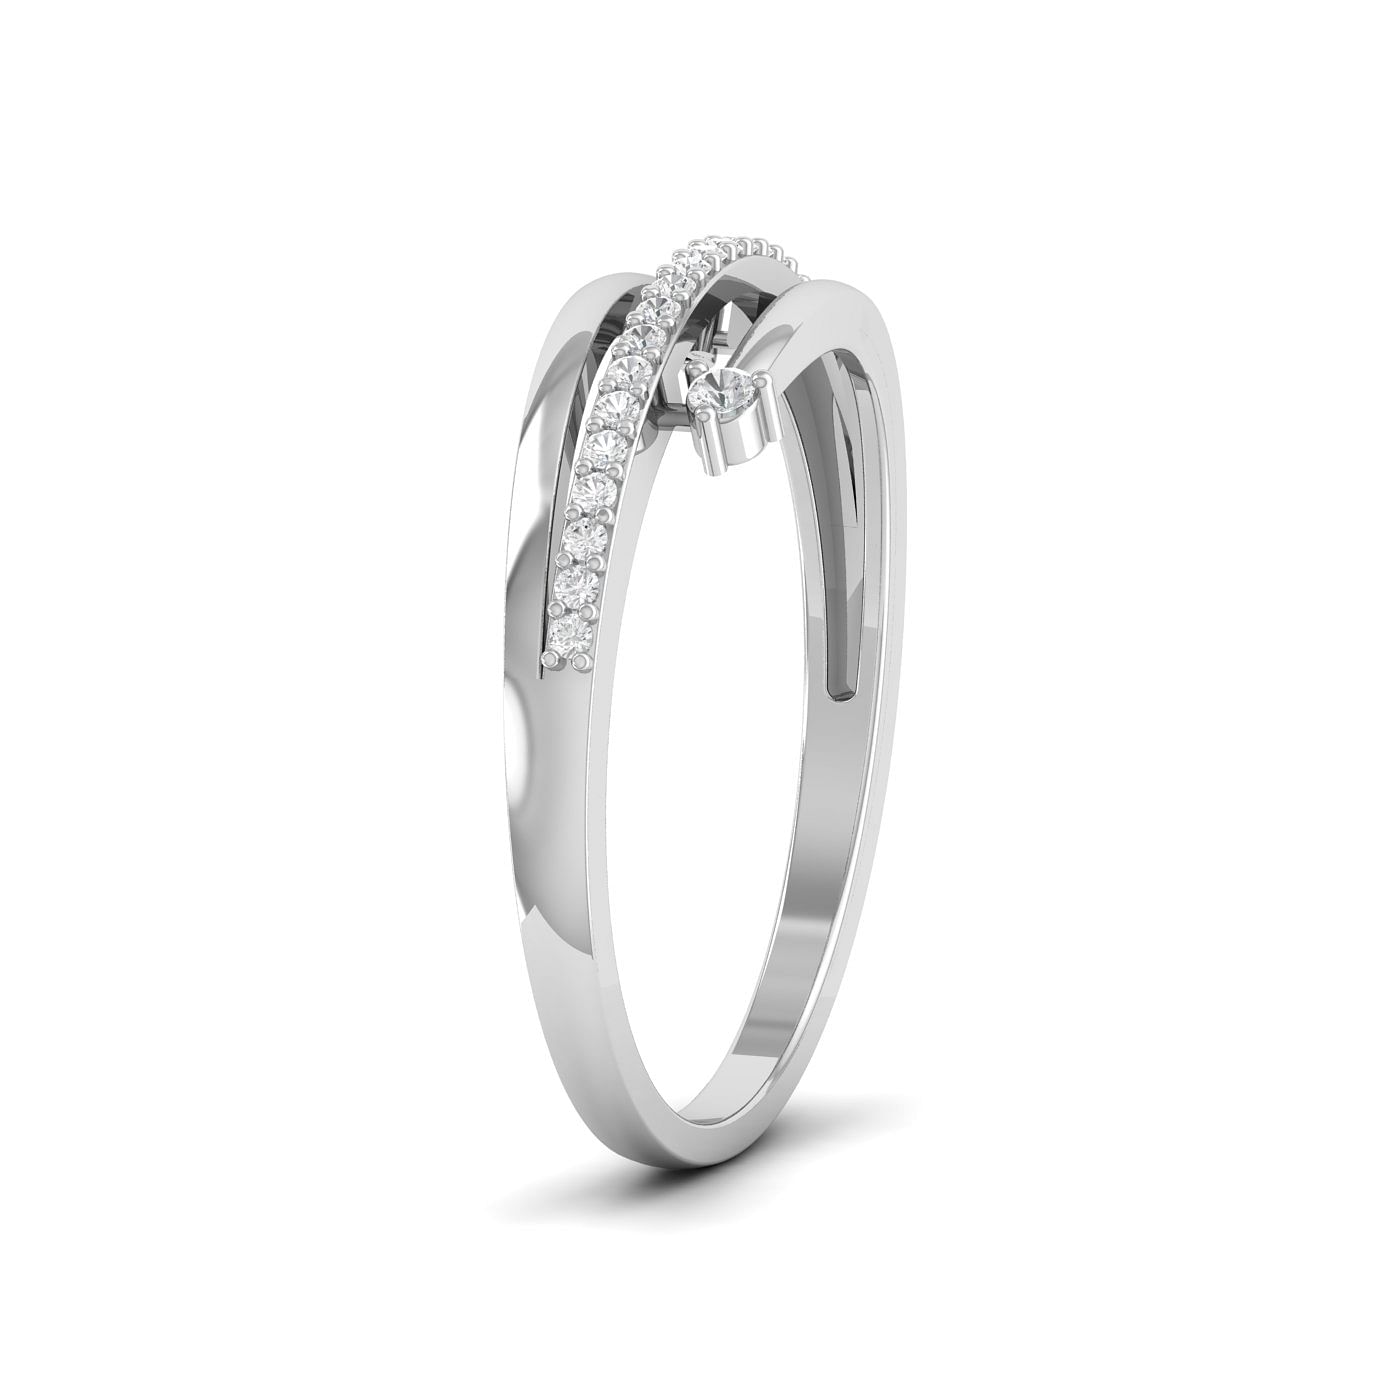 Half Eternity Spring Diamond Ring With White Gold For Gift For Her